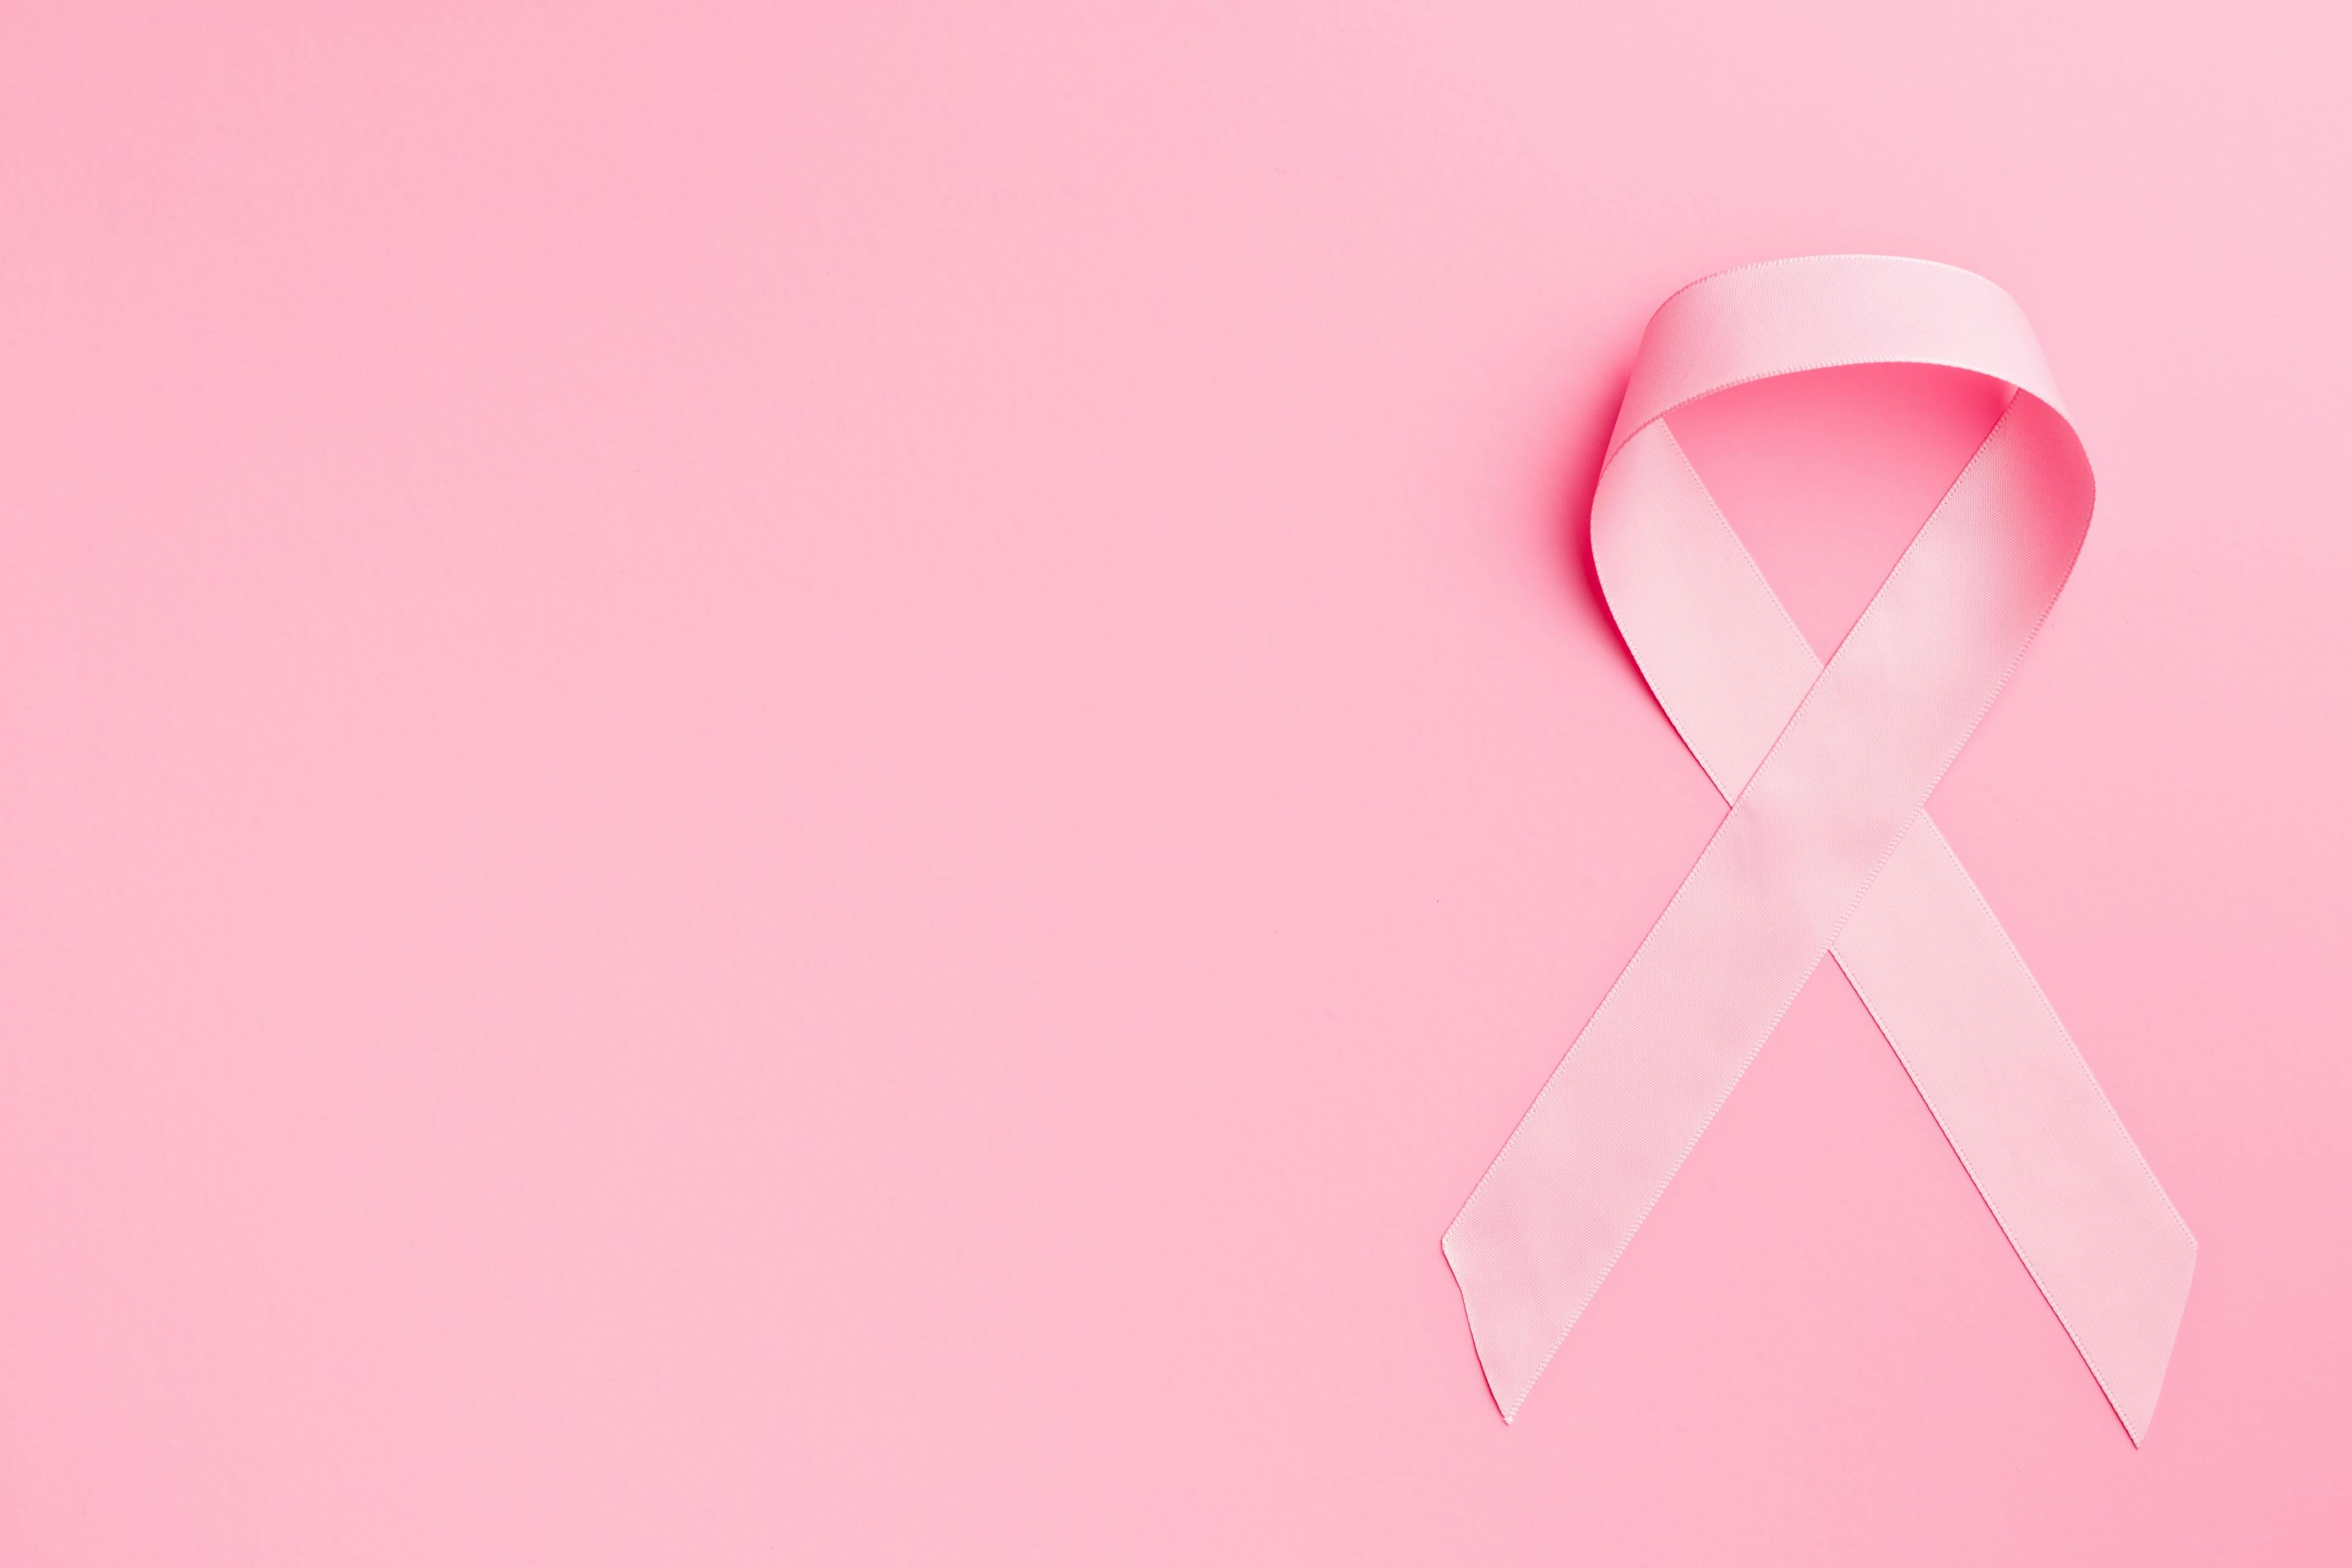 ChatGPT accuracy for breast cancer screening advice